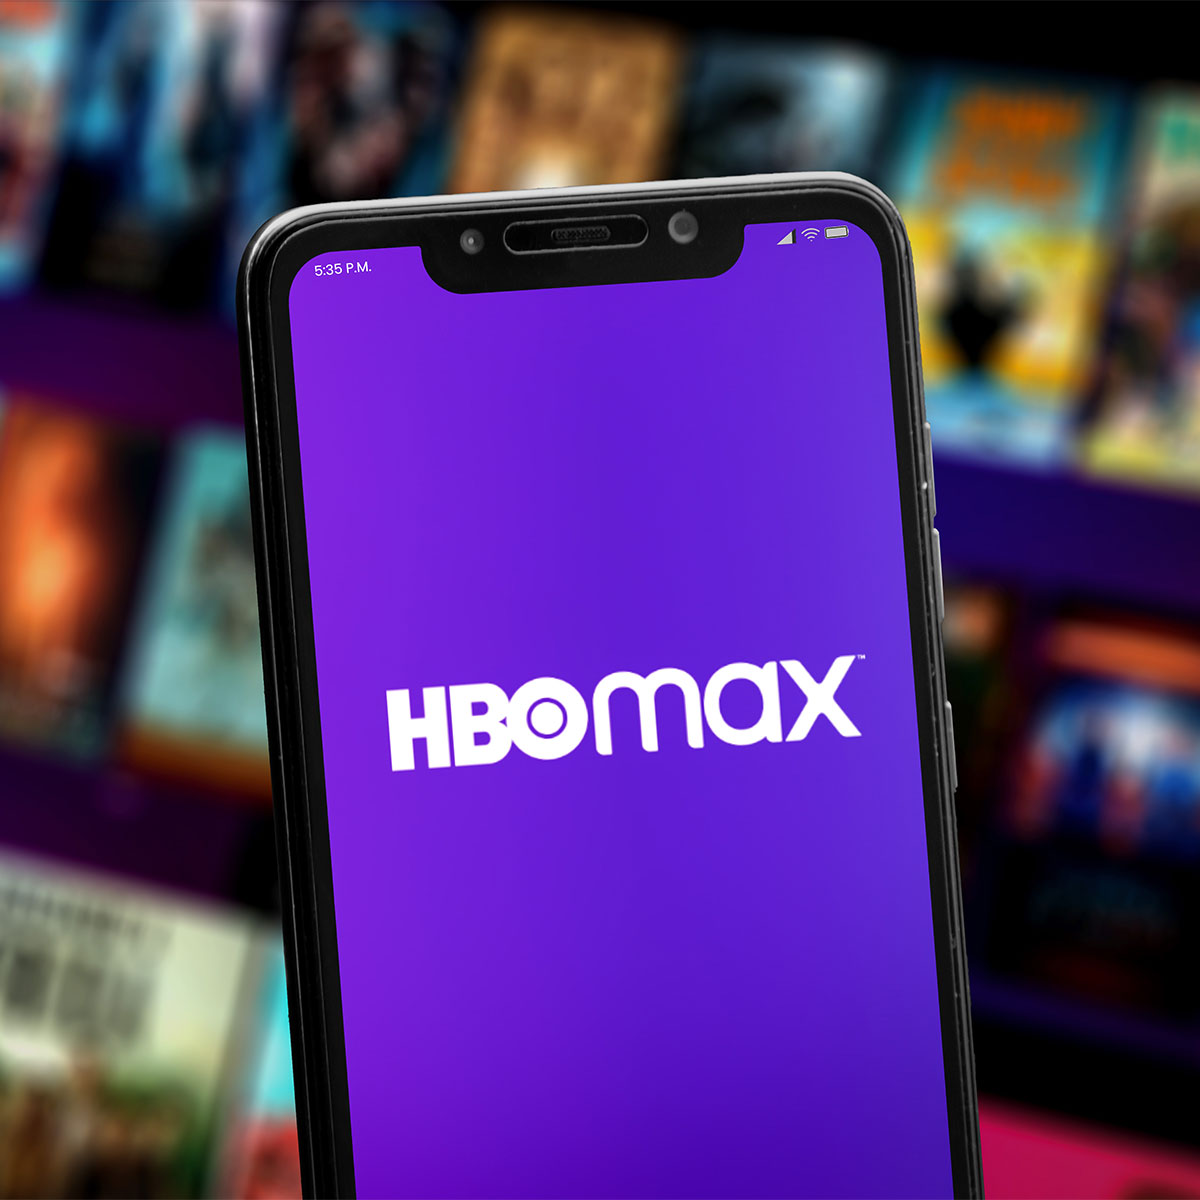 HBO Max: What's Coming and Going in January 2023